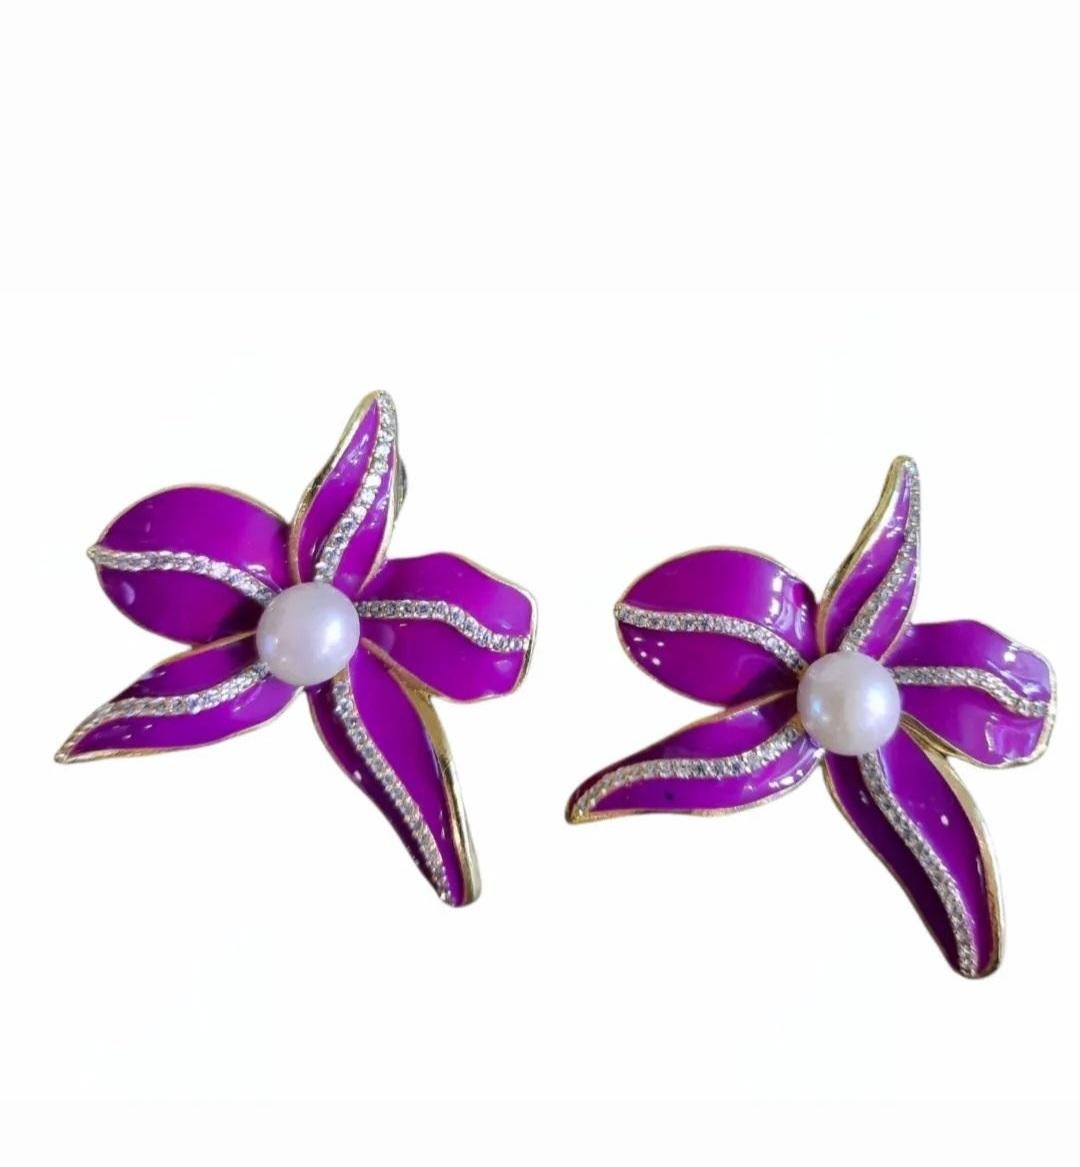 
Ngg Jewelz 
Fleur Magnifique Collection
Orchid Pearl Earrings 

Orchids are primarily symbols of beauty and good taste. They are also symbols of wealth, power, respect and admiration.

The famed Chinese philosopher, Confucius, is known to have been